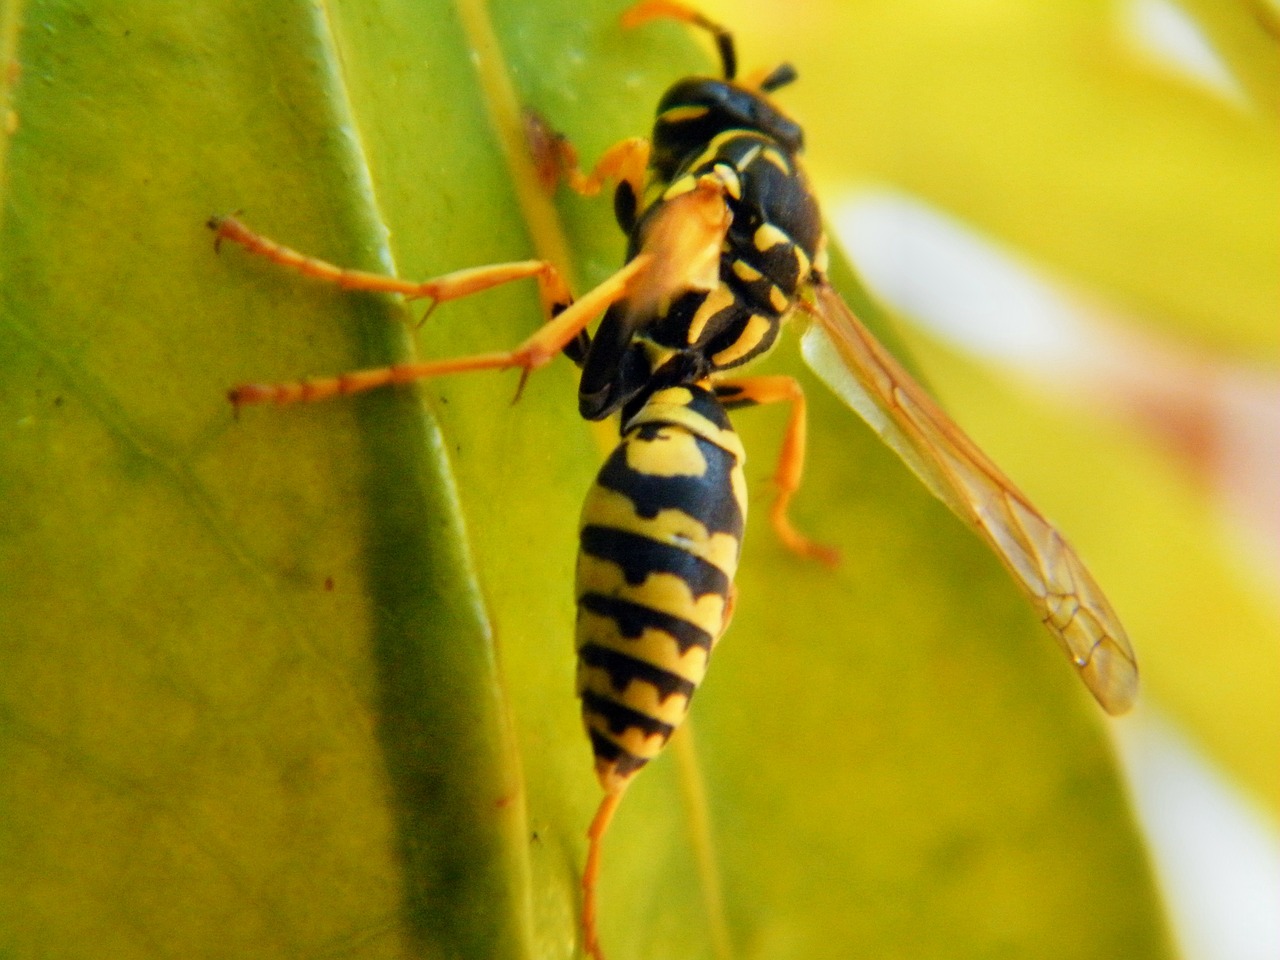 Brazilian wasp venom found to kill Cancer cells without harming healthy cells